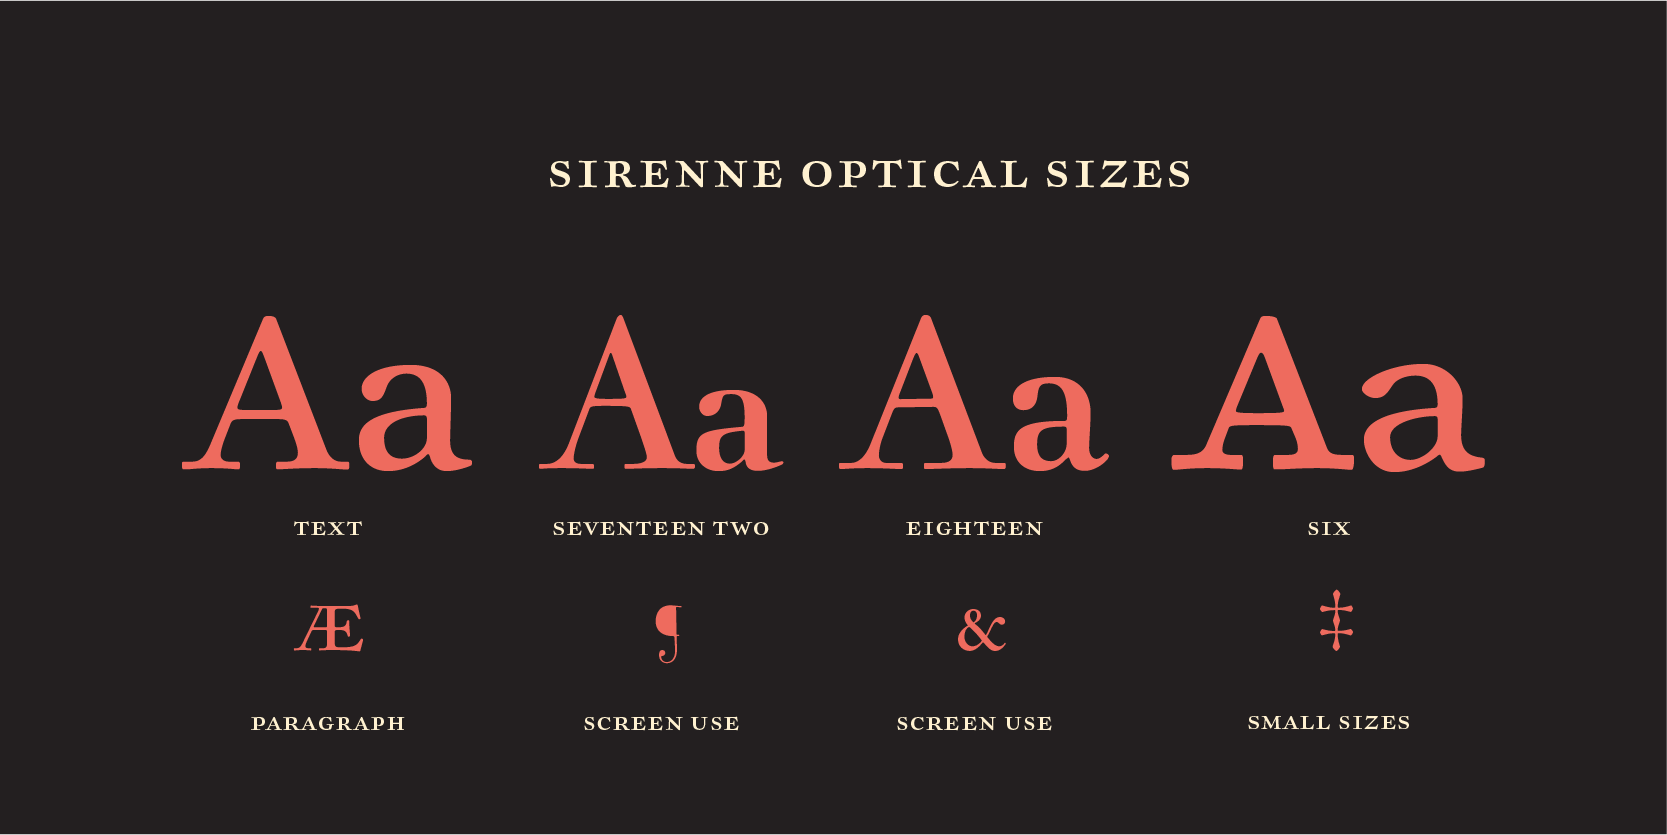 Card displaying MVB Sirenne typeface in various styles